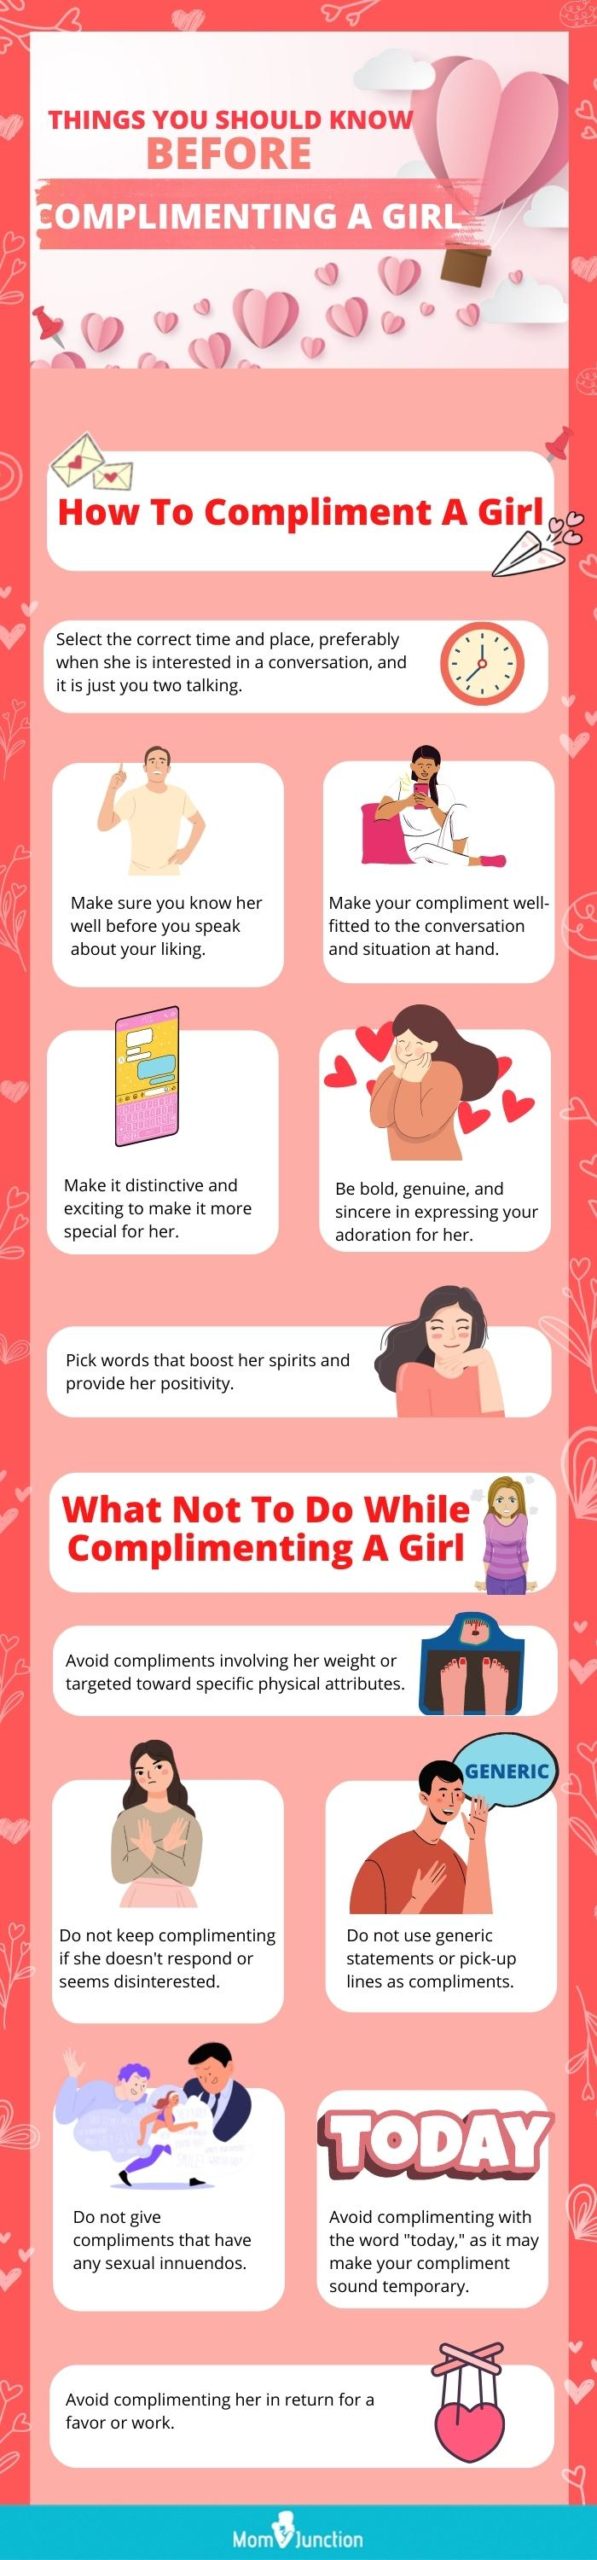 things you should Know before complimenting a girl [infographic]